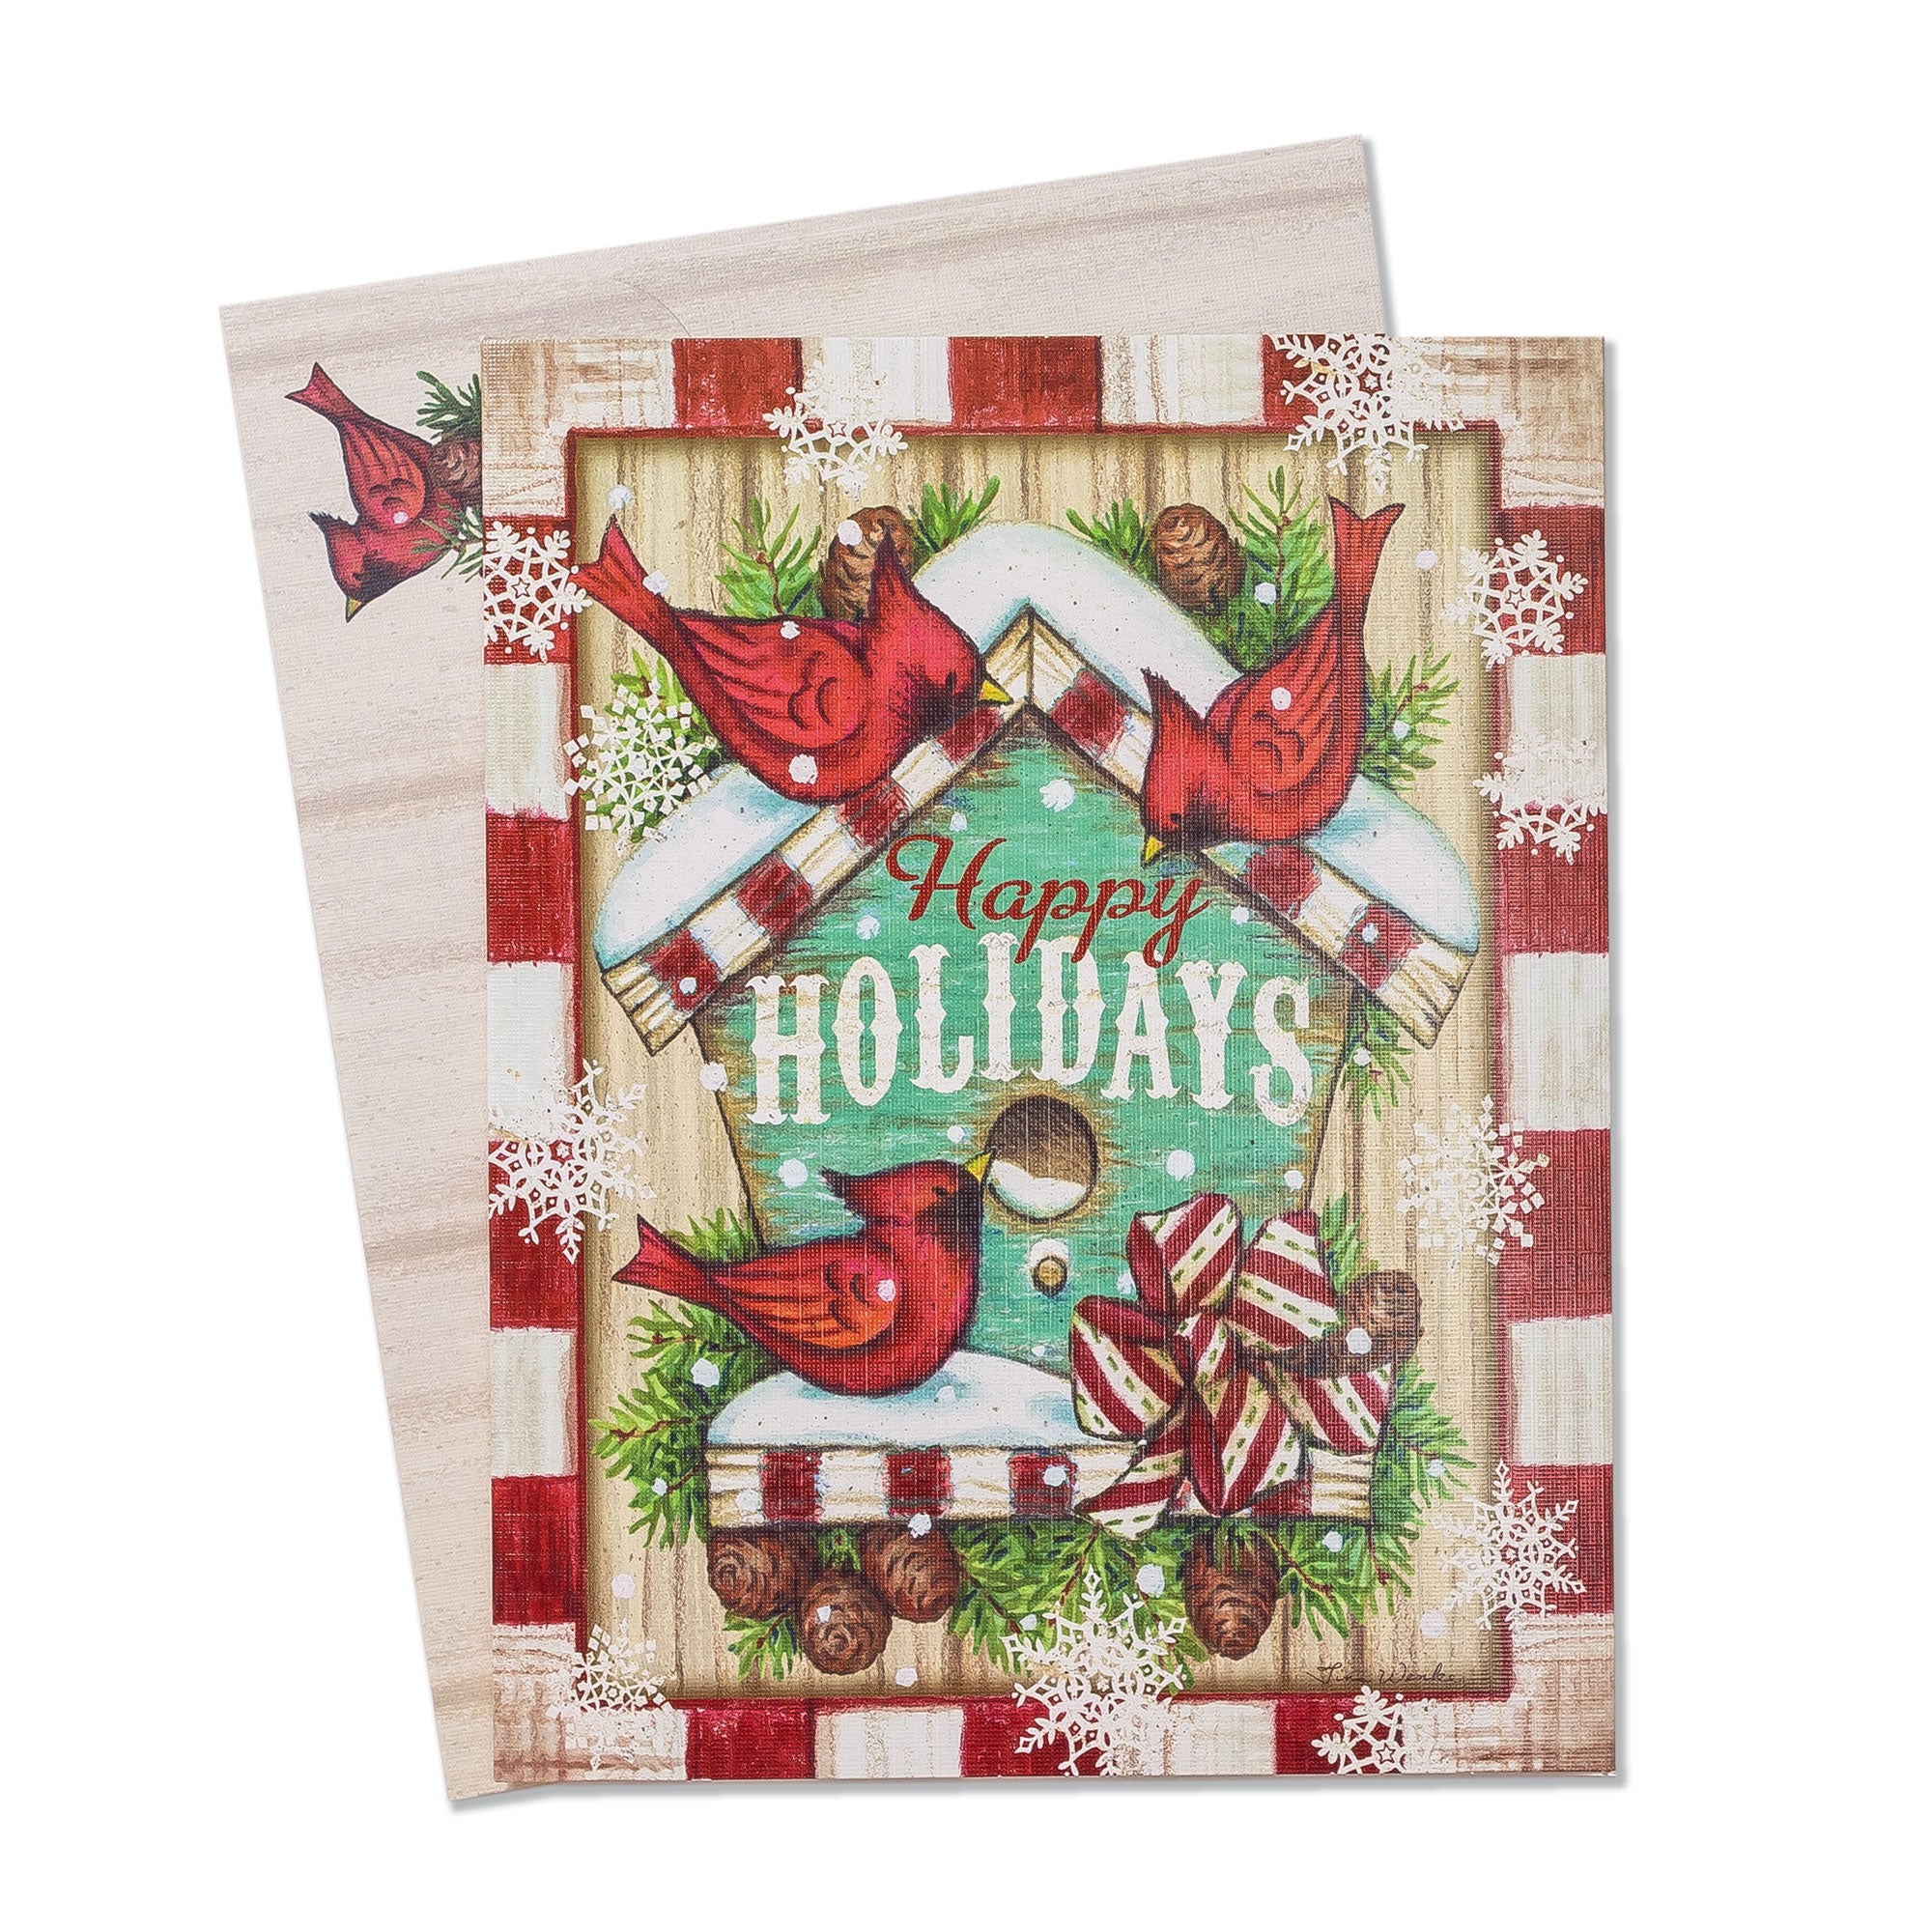 Boxed Christmas Cards: Happy Holidays Cardinals Birdhouse